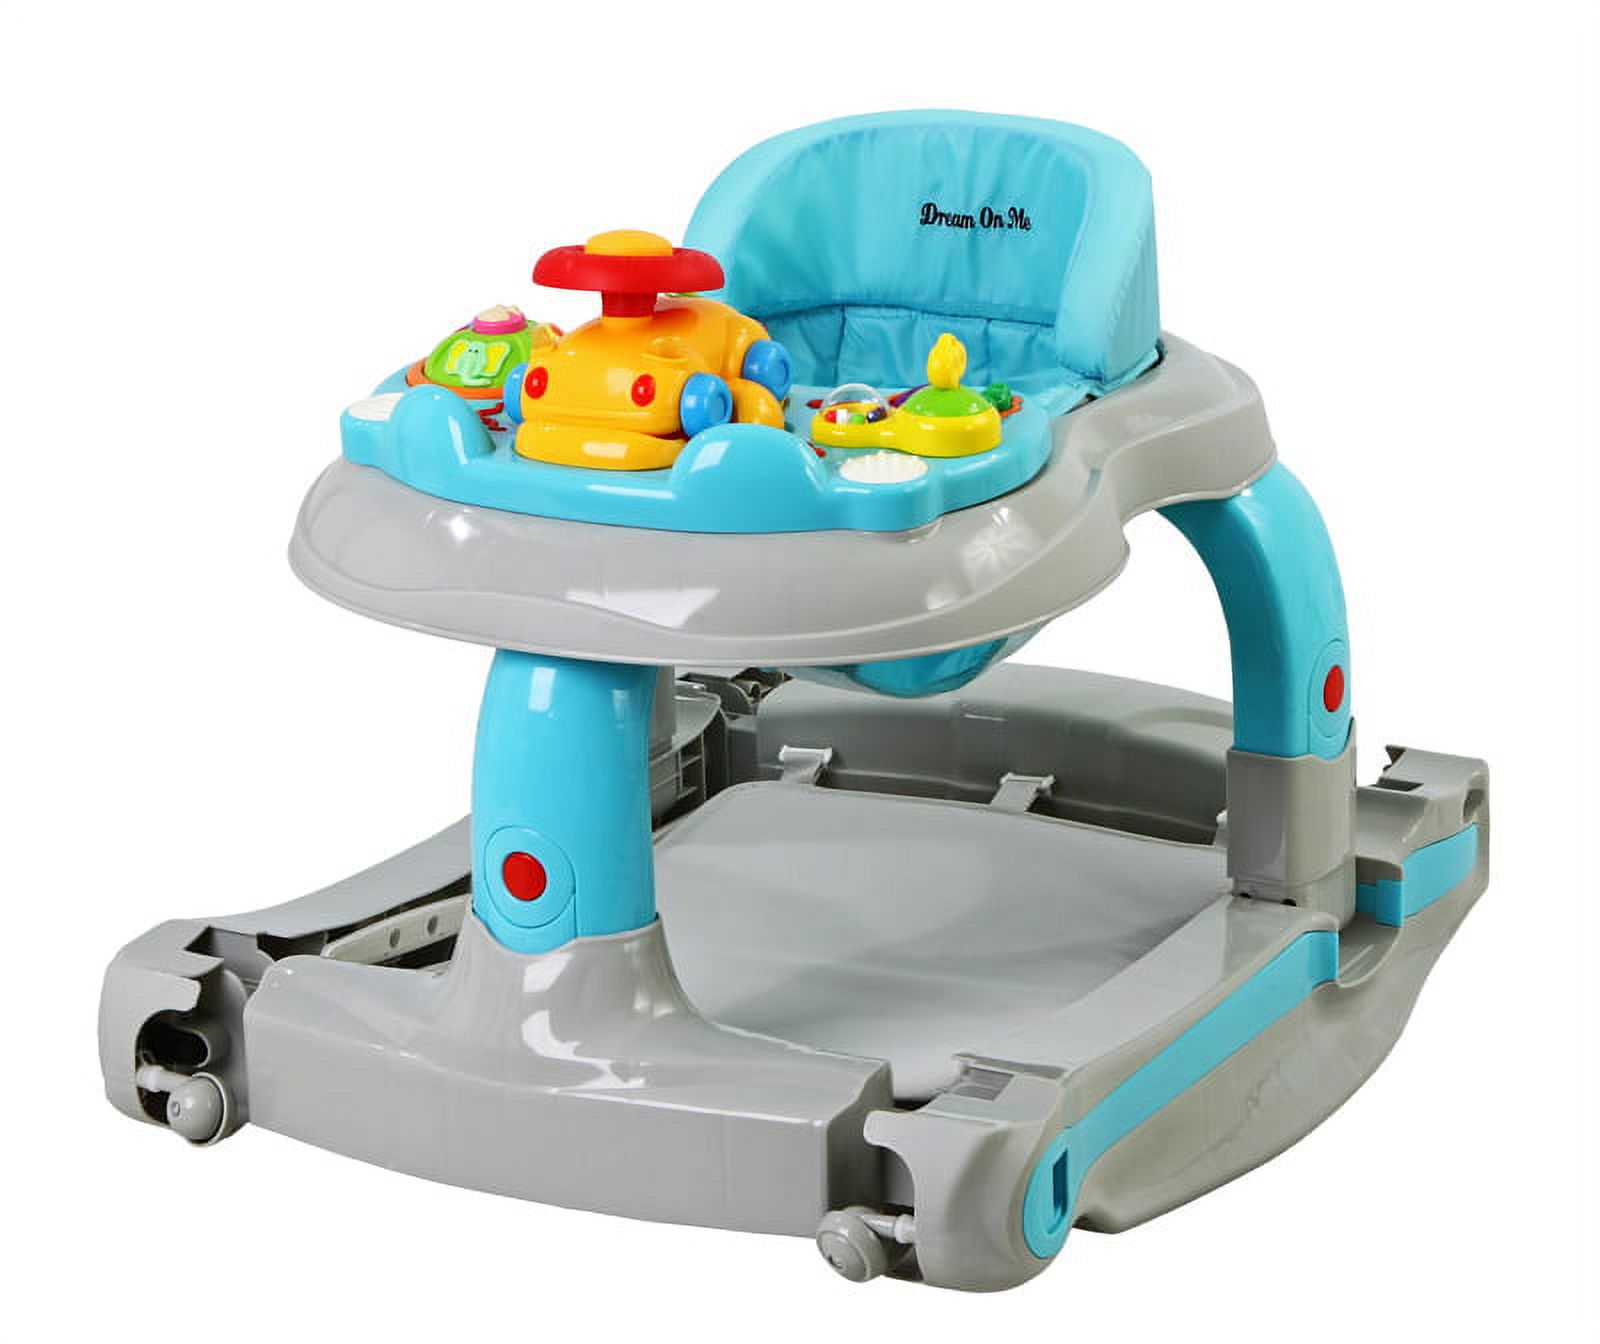 Dream On Me - 2-in-1 Baby Tunes Musical Activity Walker and Rocker, Gray - image 3 of 4